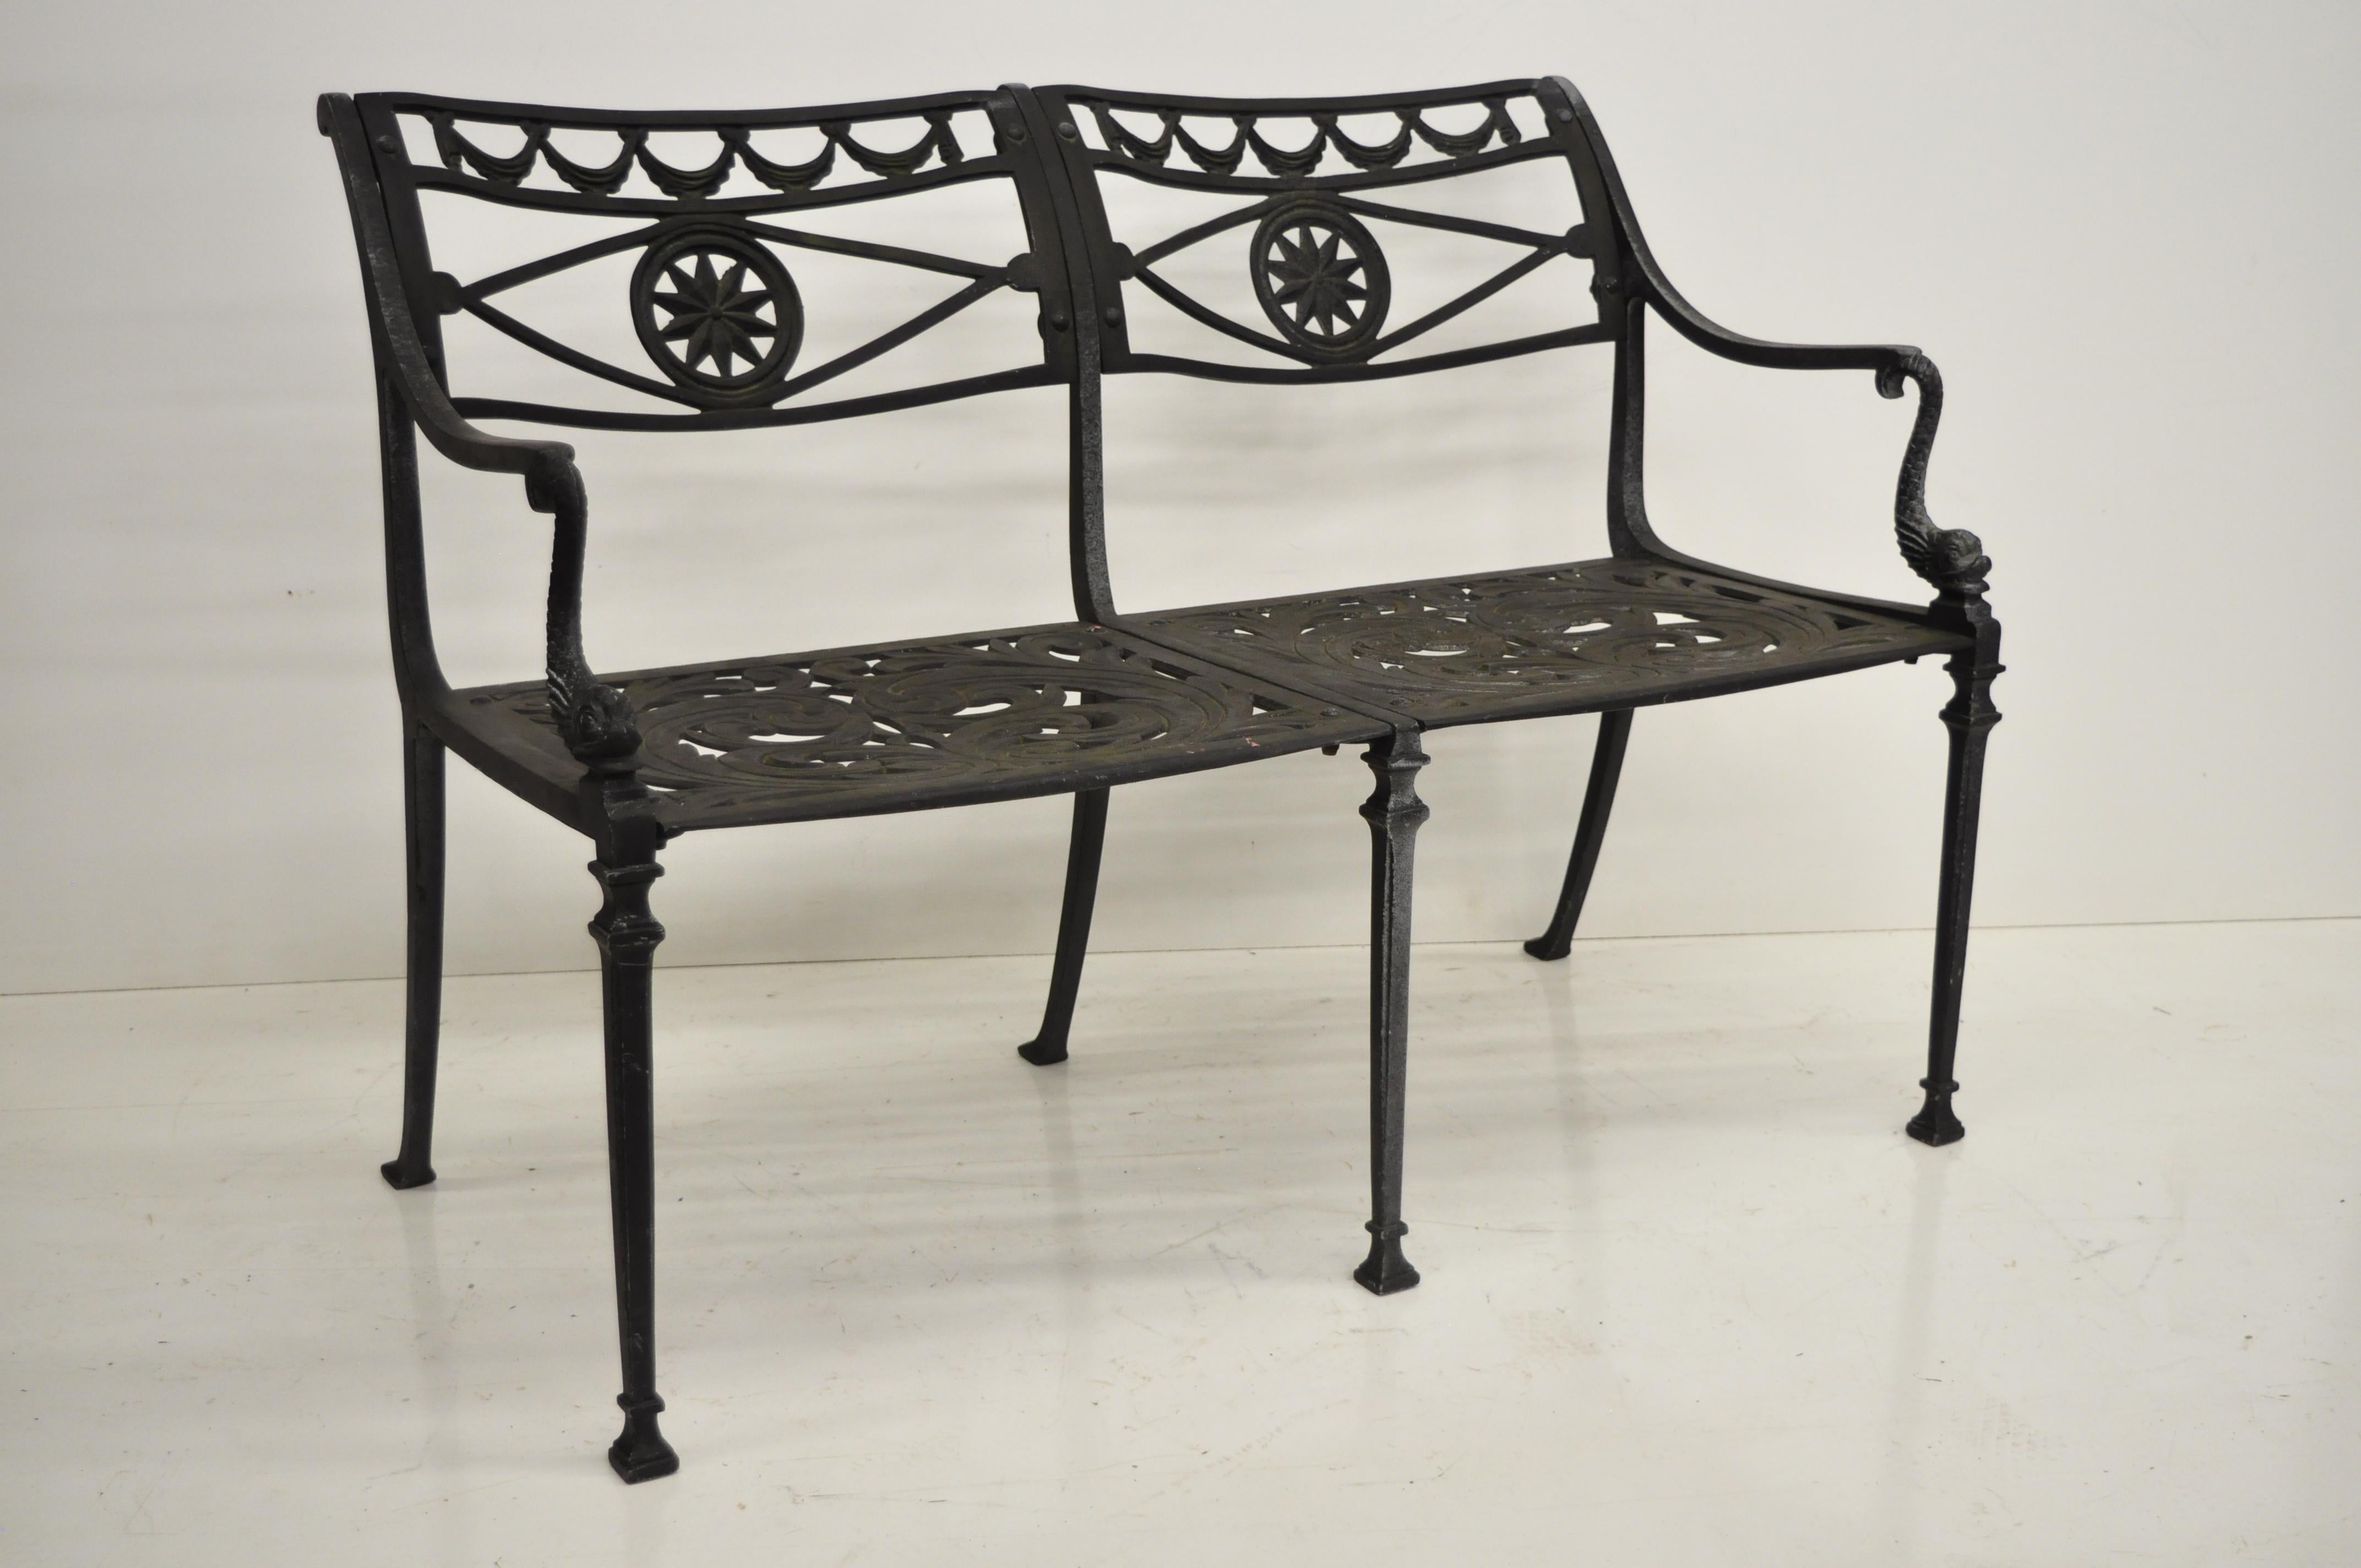 20th Century Neoclassical Style Dolphin Patio Double Settee Bench Attributed to Molla